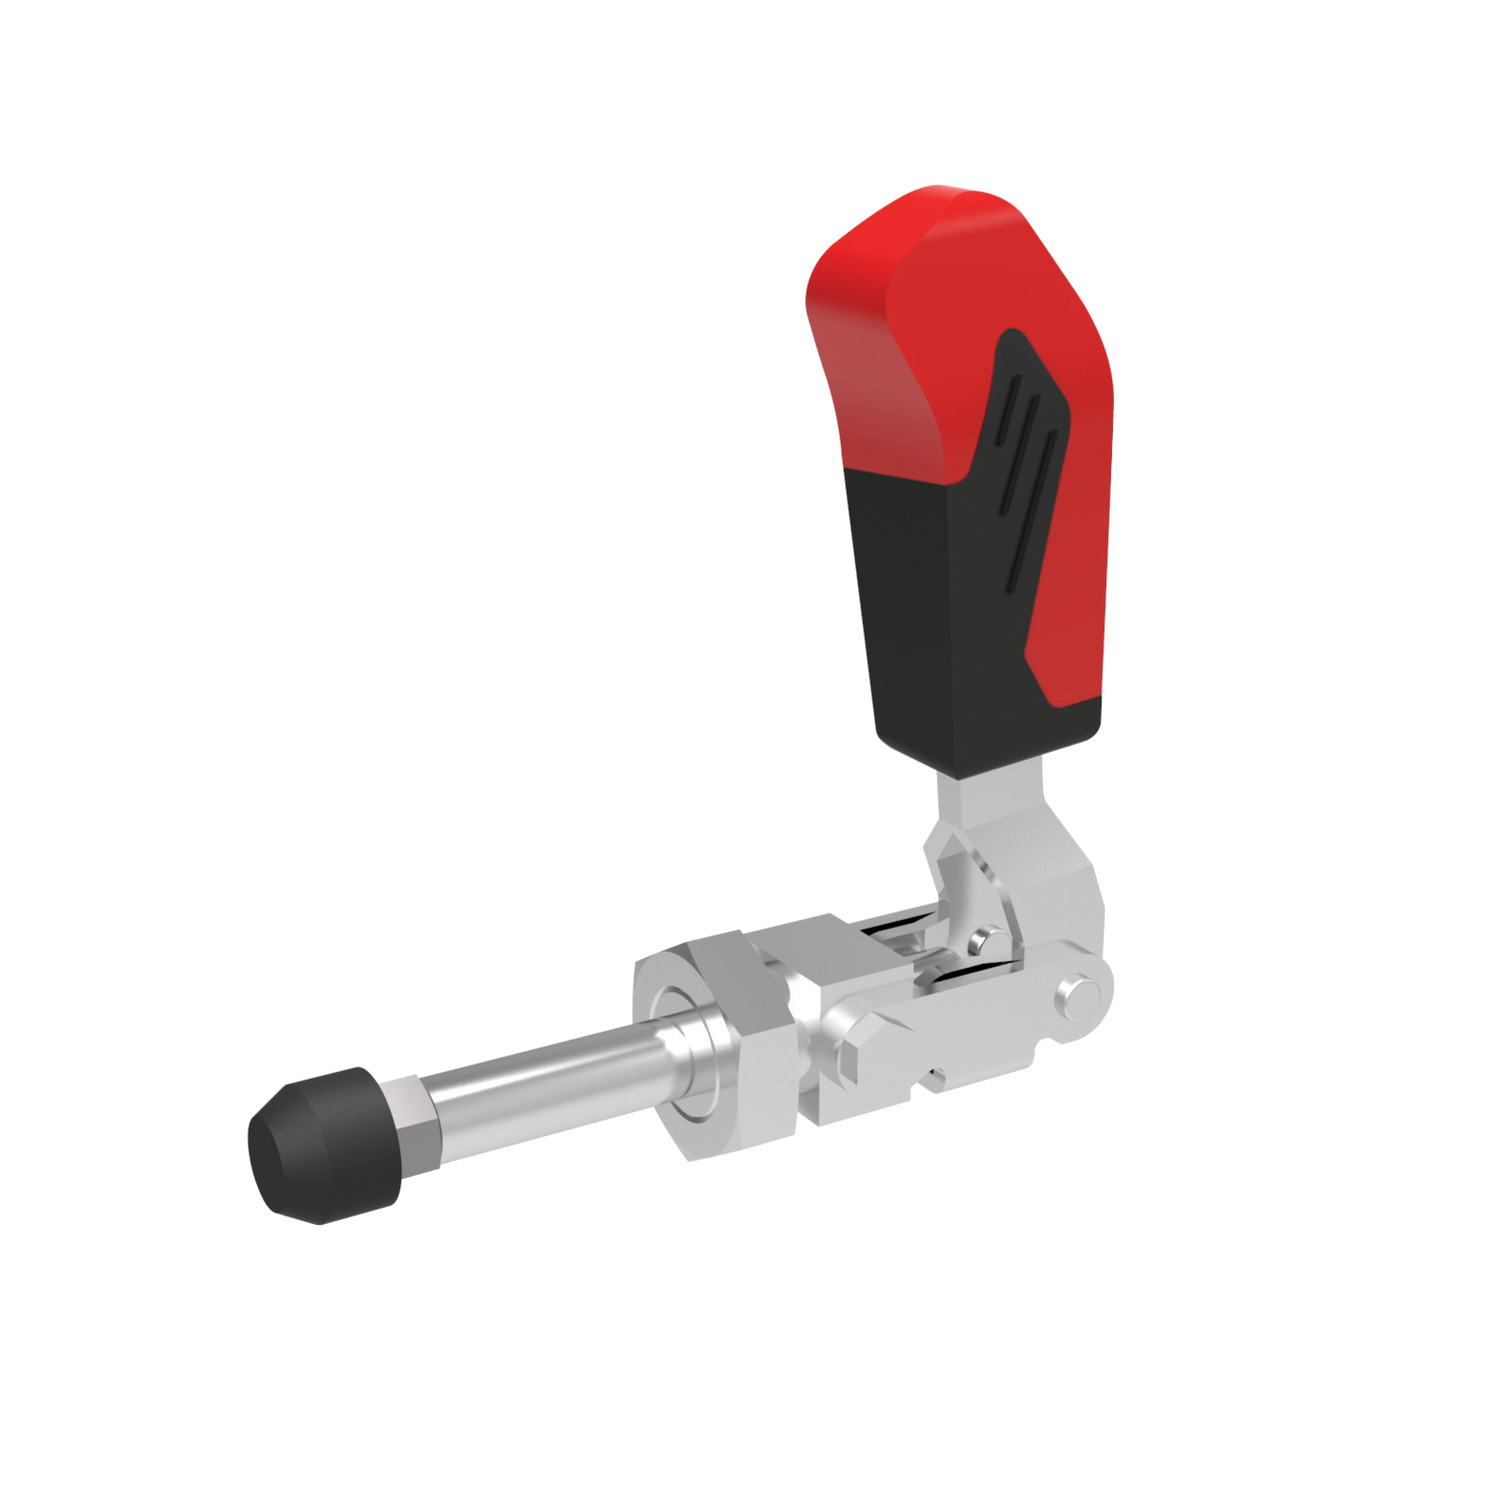 Steel Push-Pull Type Toggle Clamps Push-pull manual toggle clamps with a compact design that maintains long travel length. Ideal for space efficient applications.